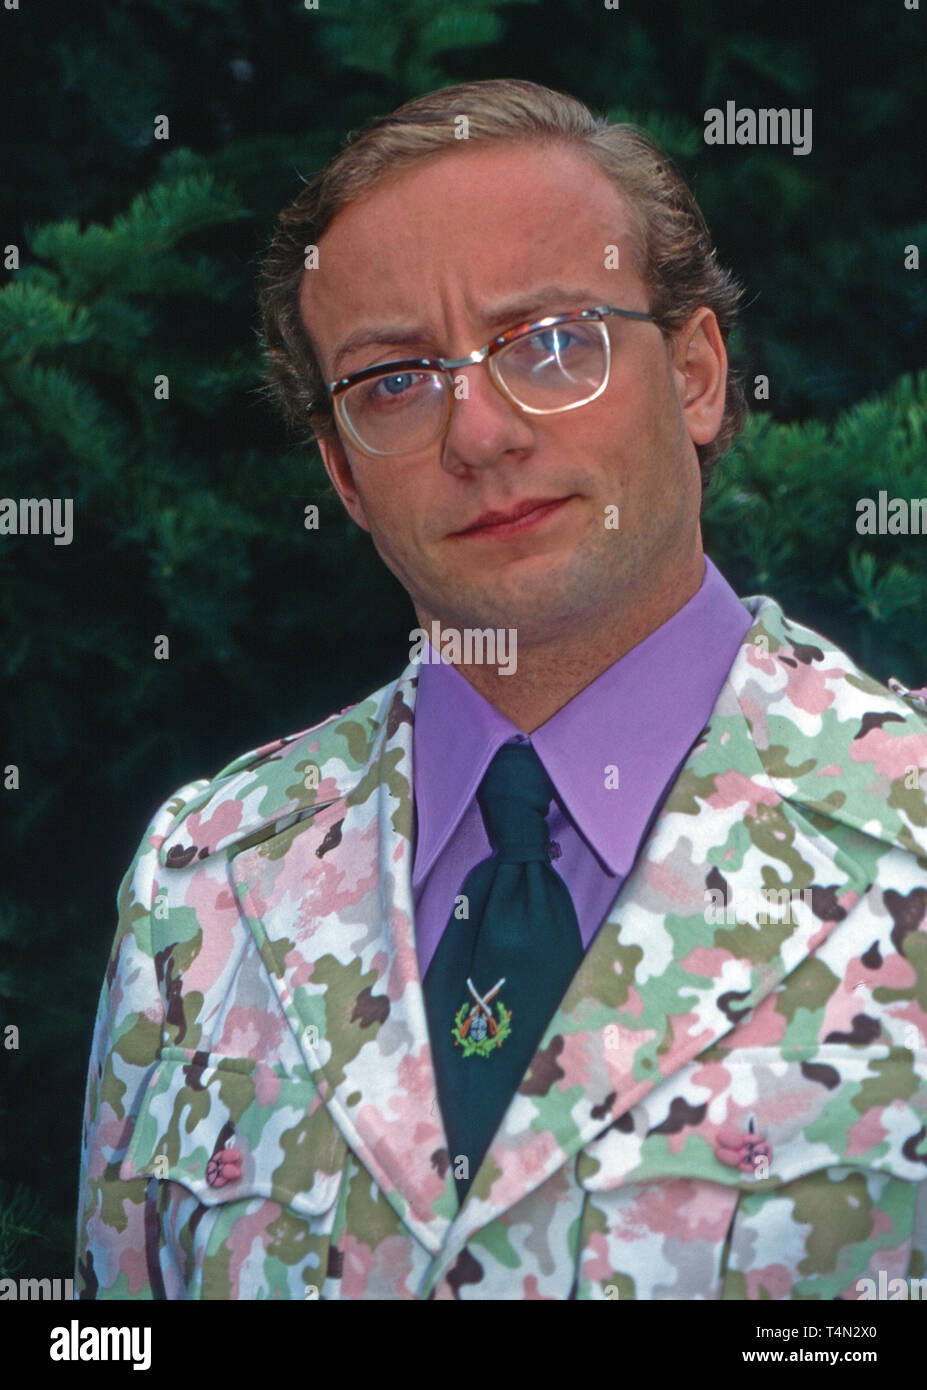 German Moderator And Comedian High Resolution Stock Photography And Images Alamy